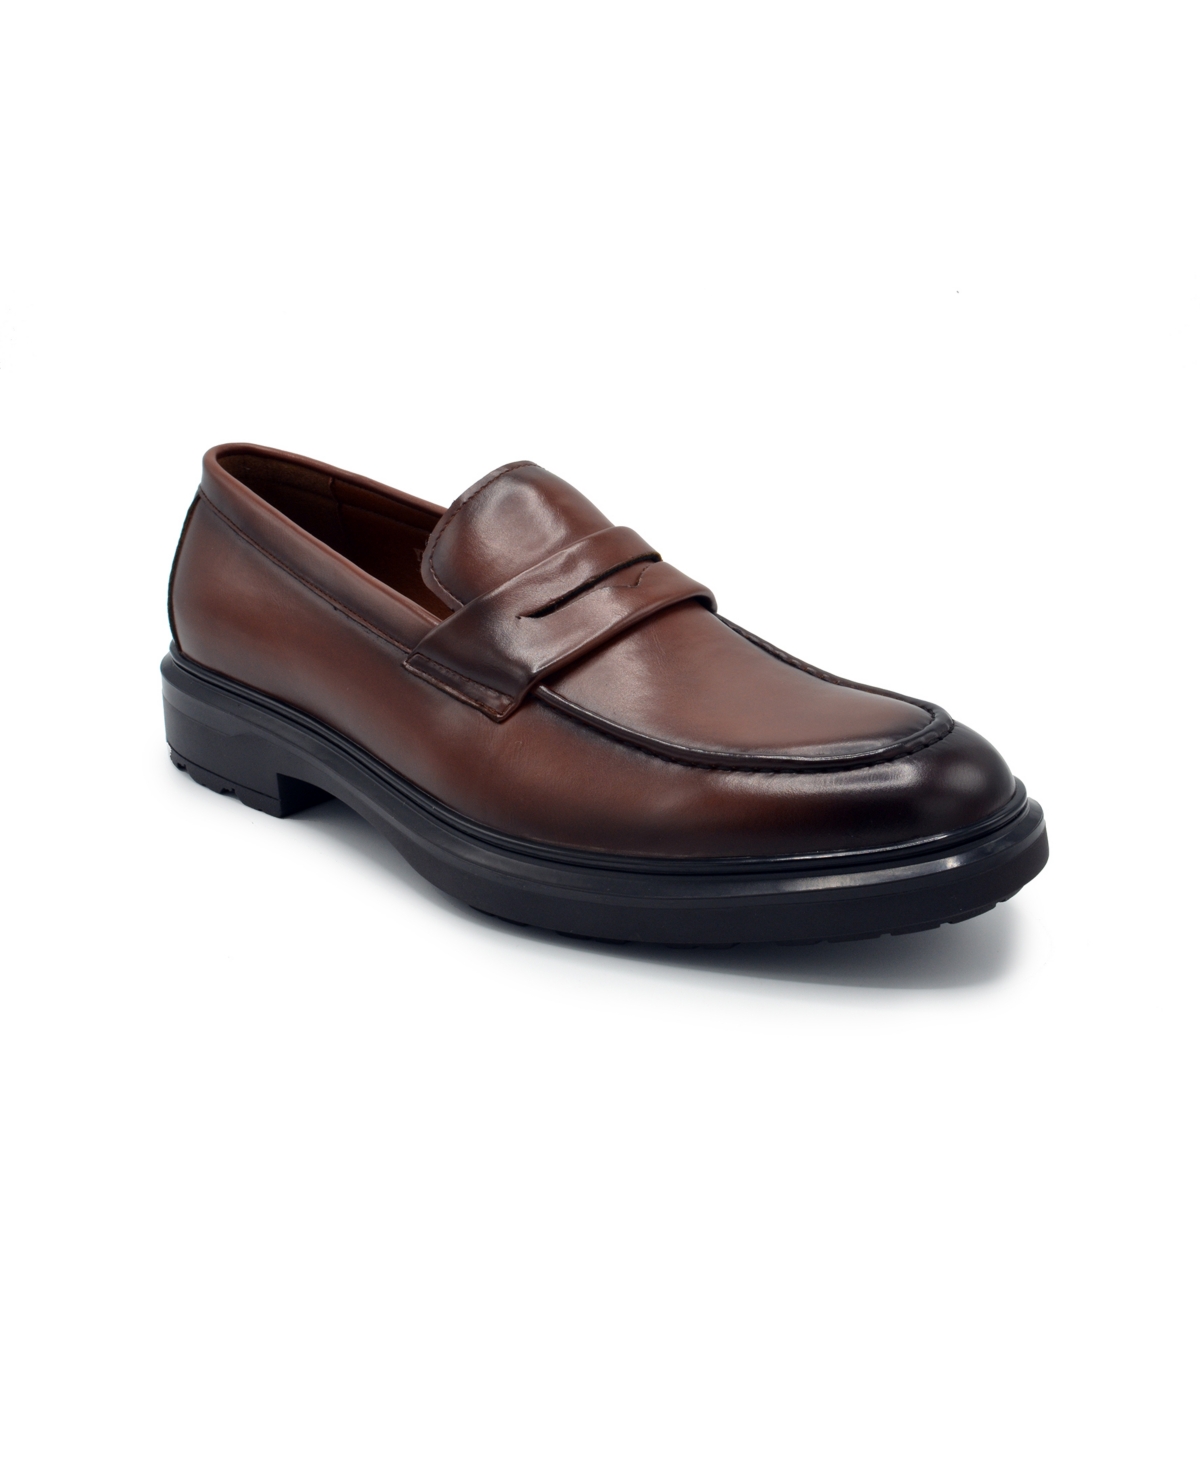 Aston Marc Men's Tuscan Penny Loafer Dress Shoes Men's Shoes In Tan